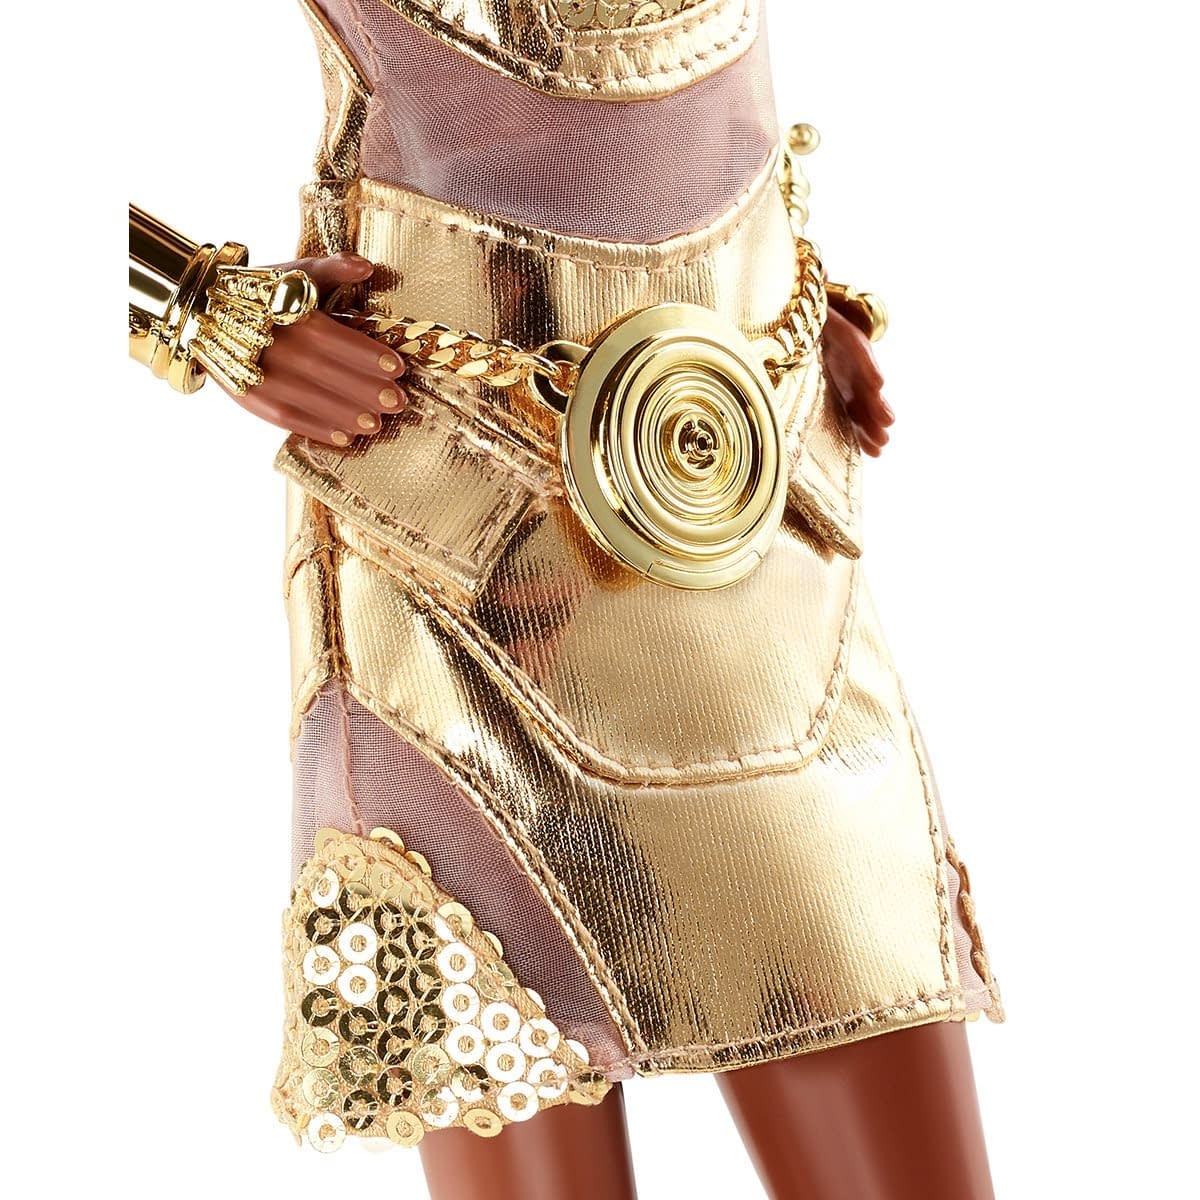 The Star Wars x Barbie Collection from Mattel C-3PO